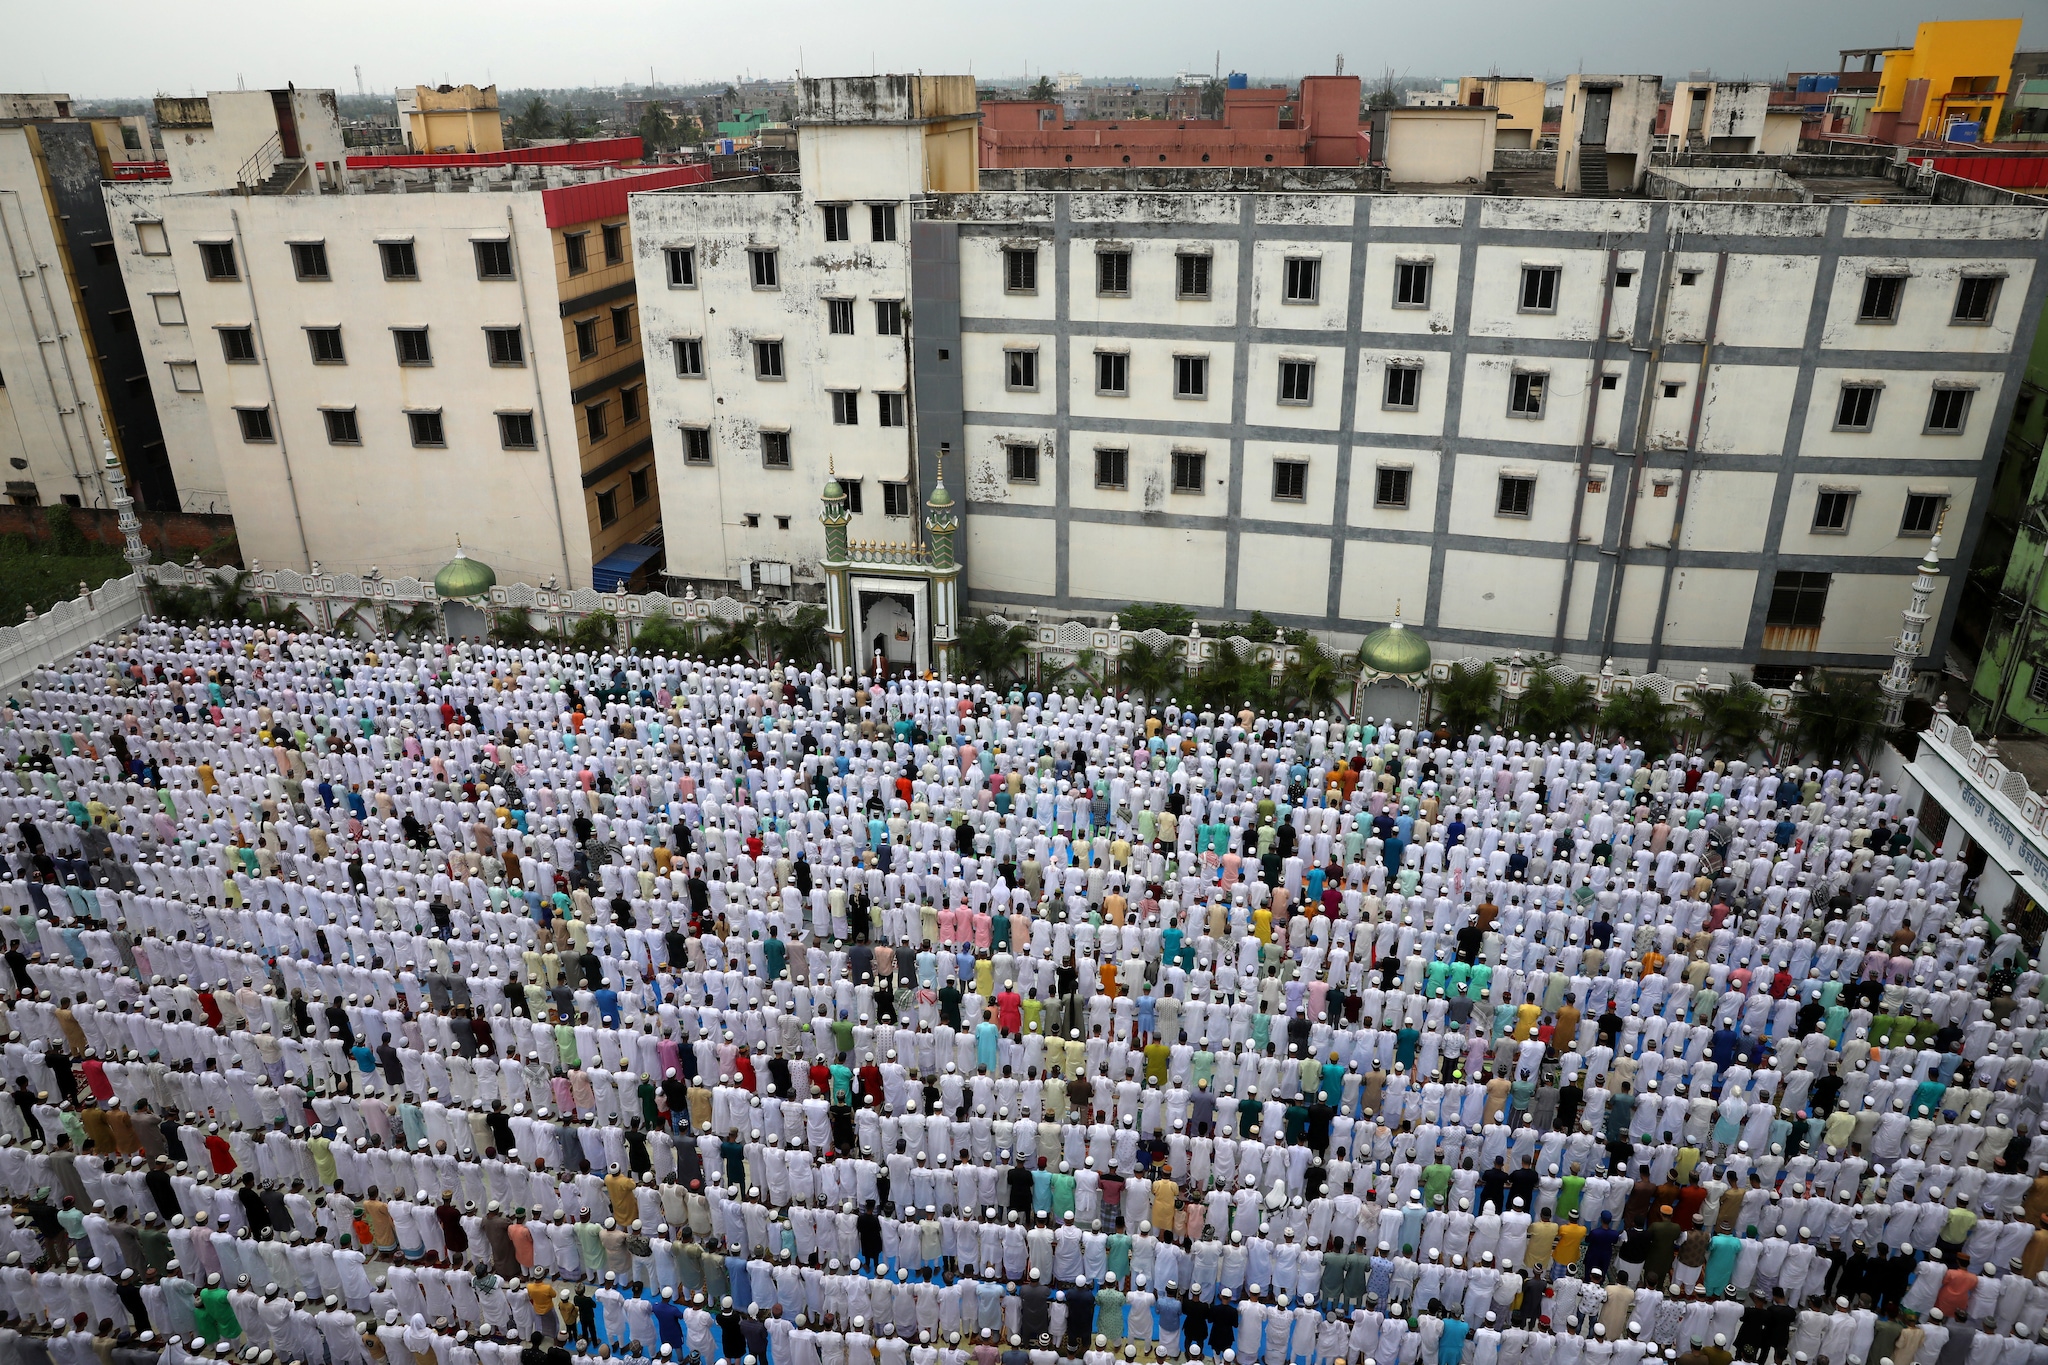 KOLKATA: Muslims offer Eid al-Fitr prayers marking the end of the holy fasting month of Ramadan, in Howrah on the outskirts of Kolkata. (Image: Reuters)